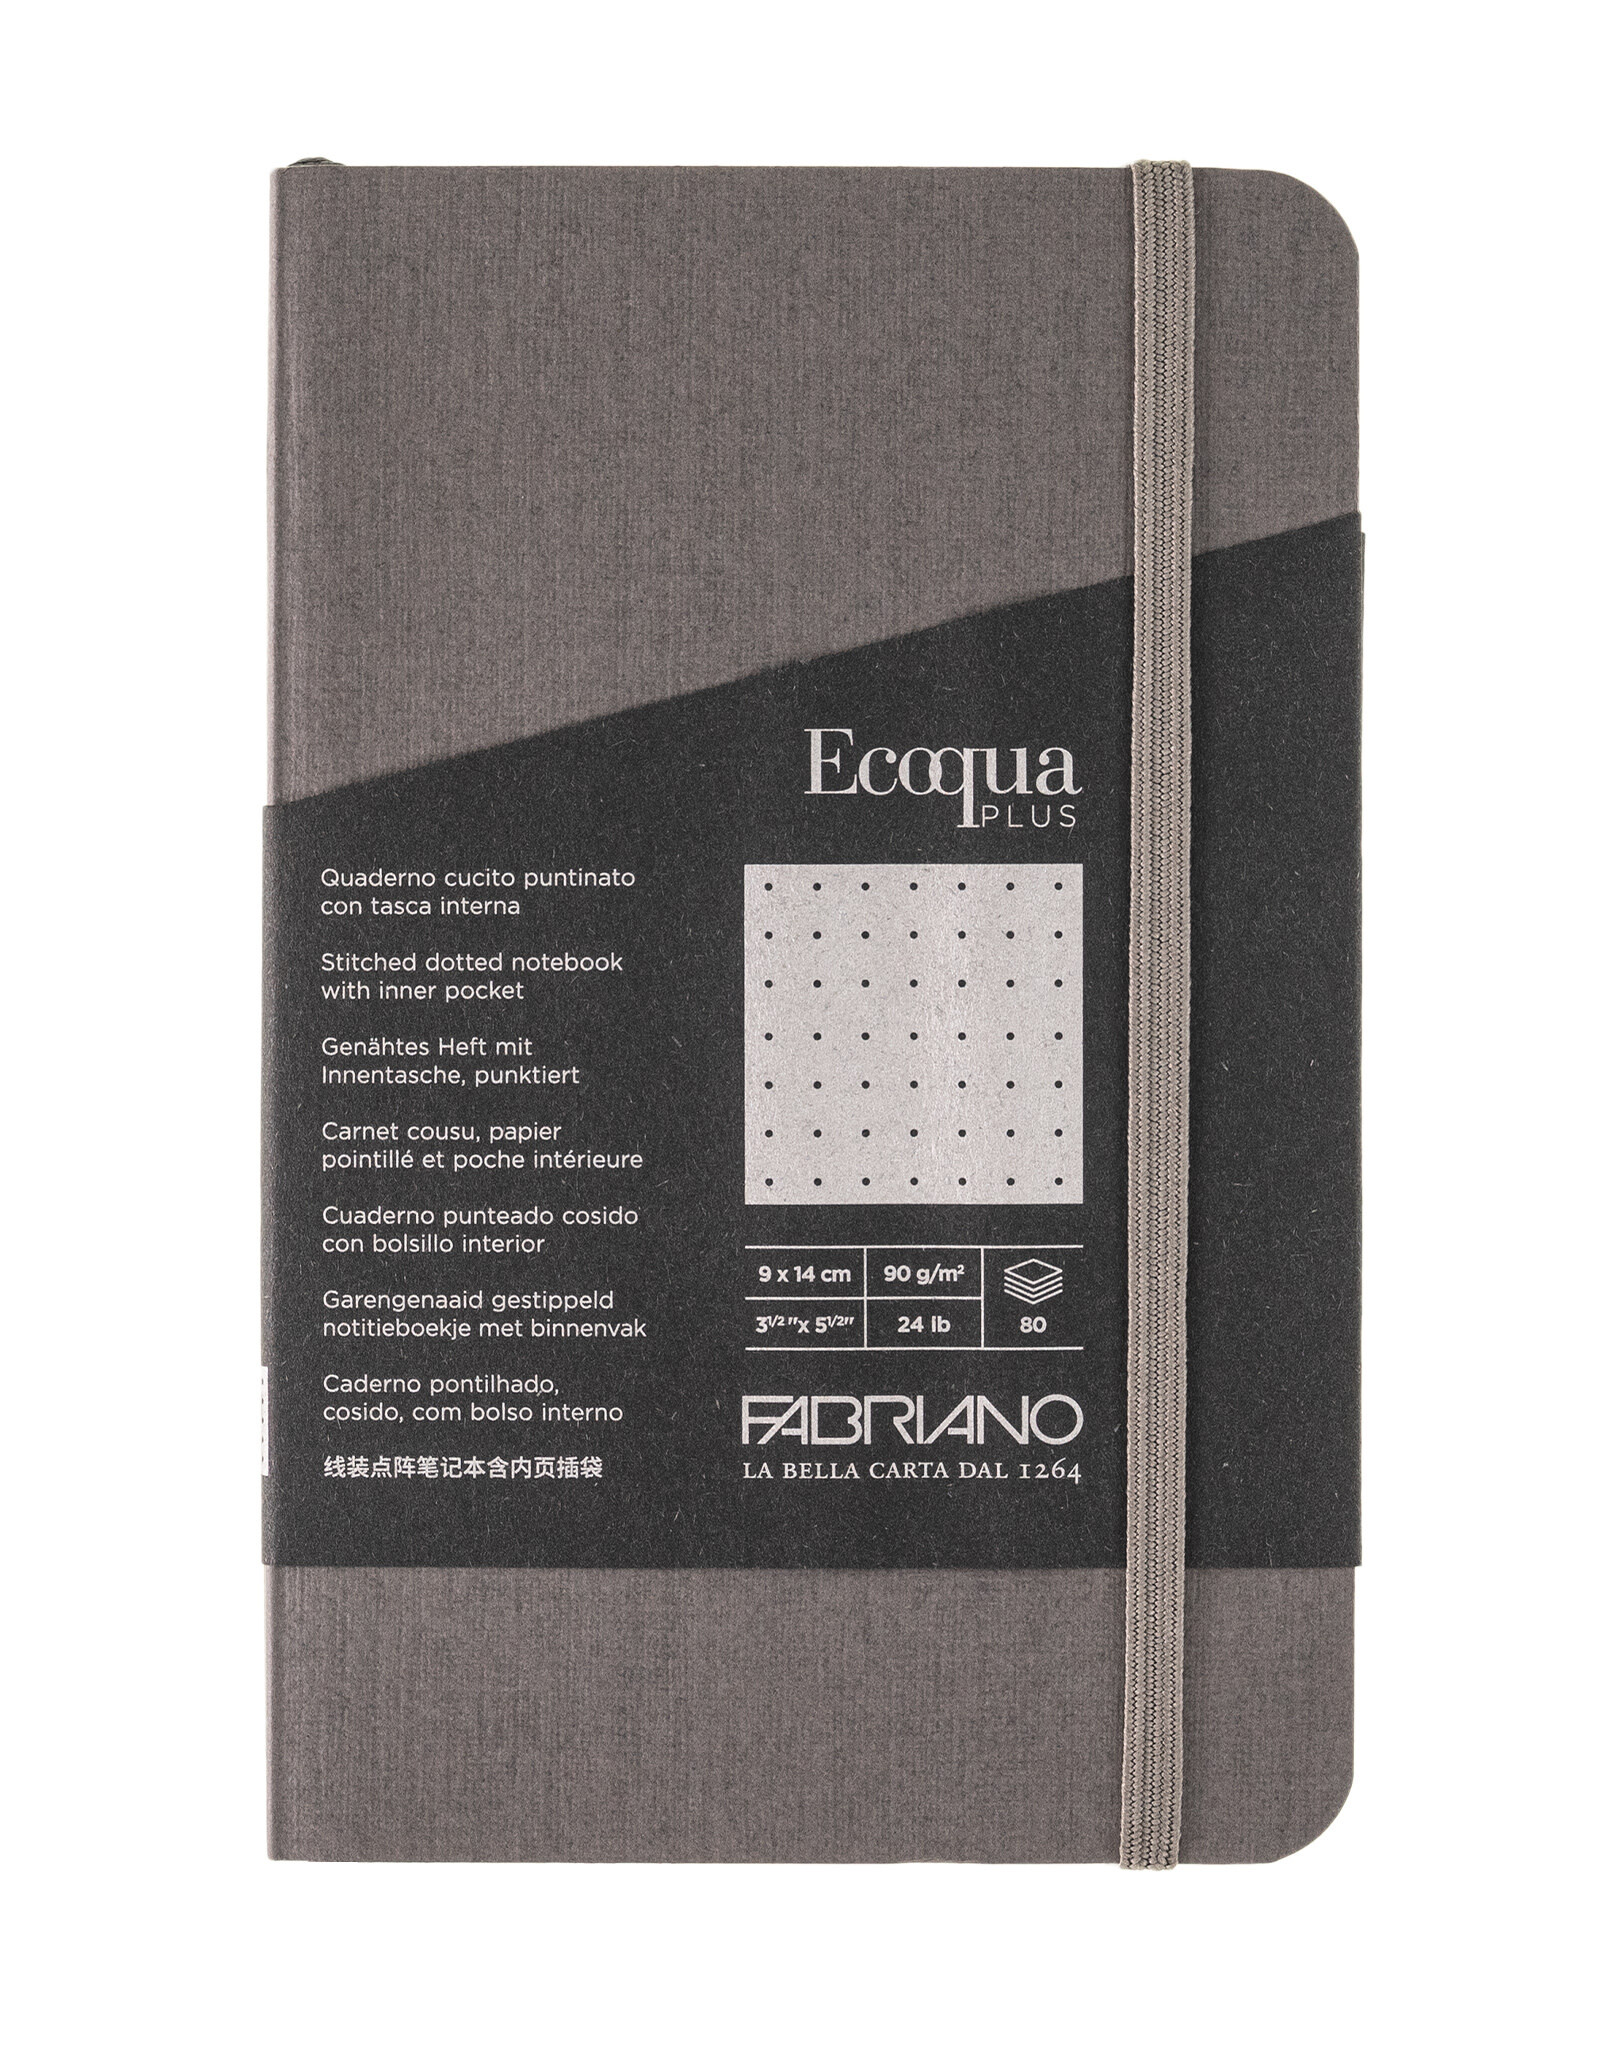 Ecoqua Plus Sewn Spine Notebook, Grey, 3.5” x 5.5”, Dotted